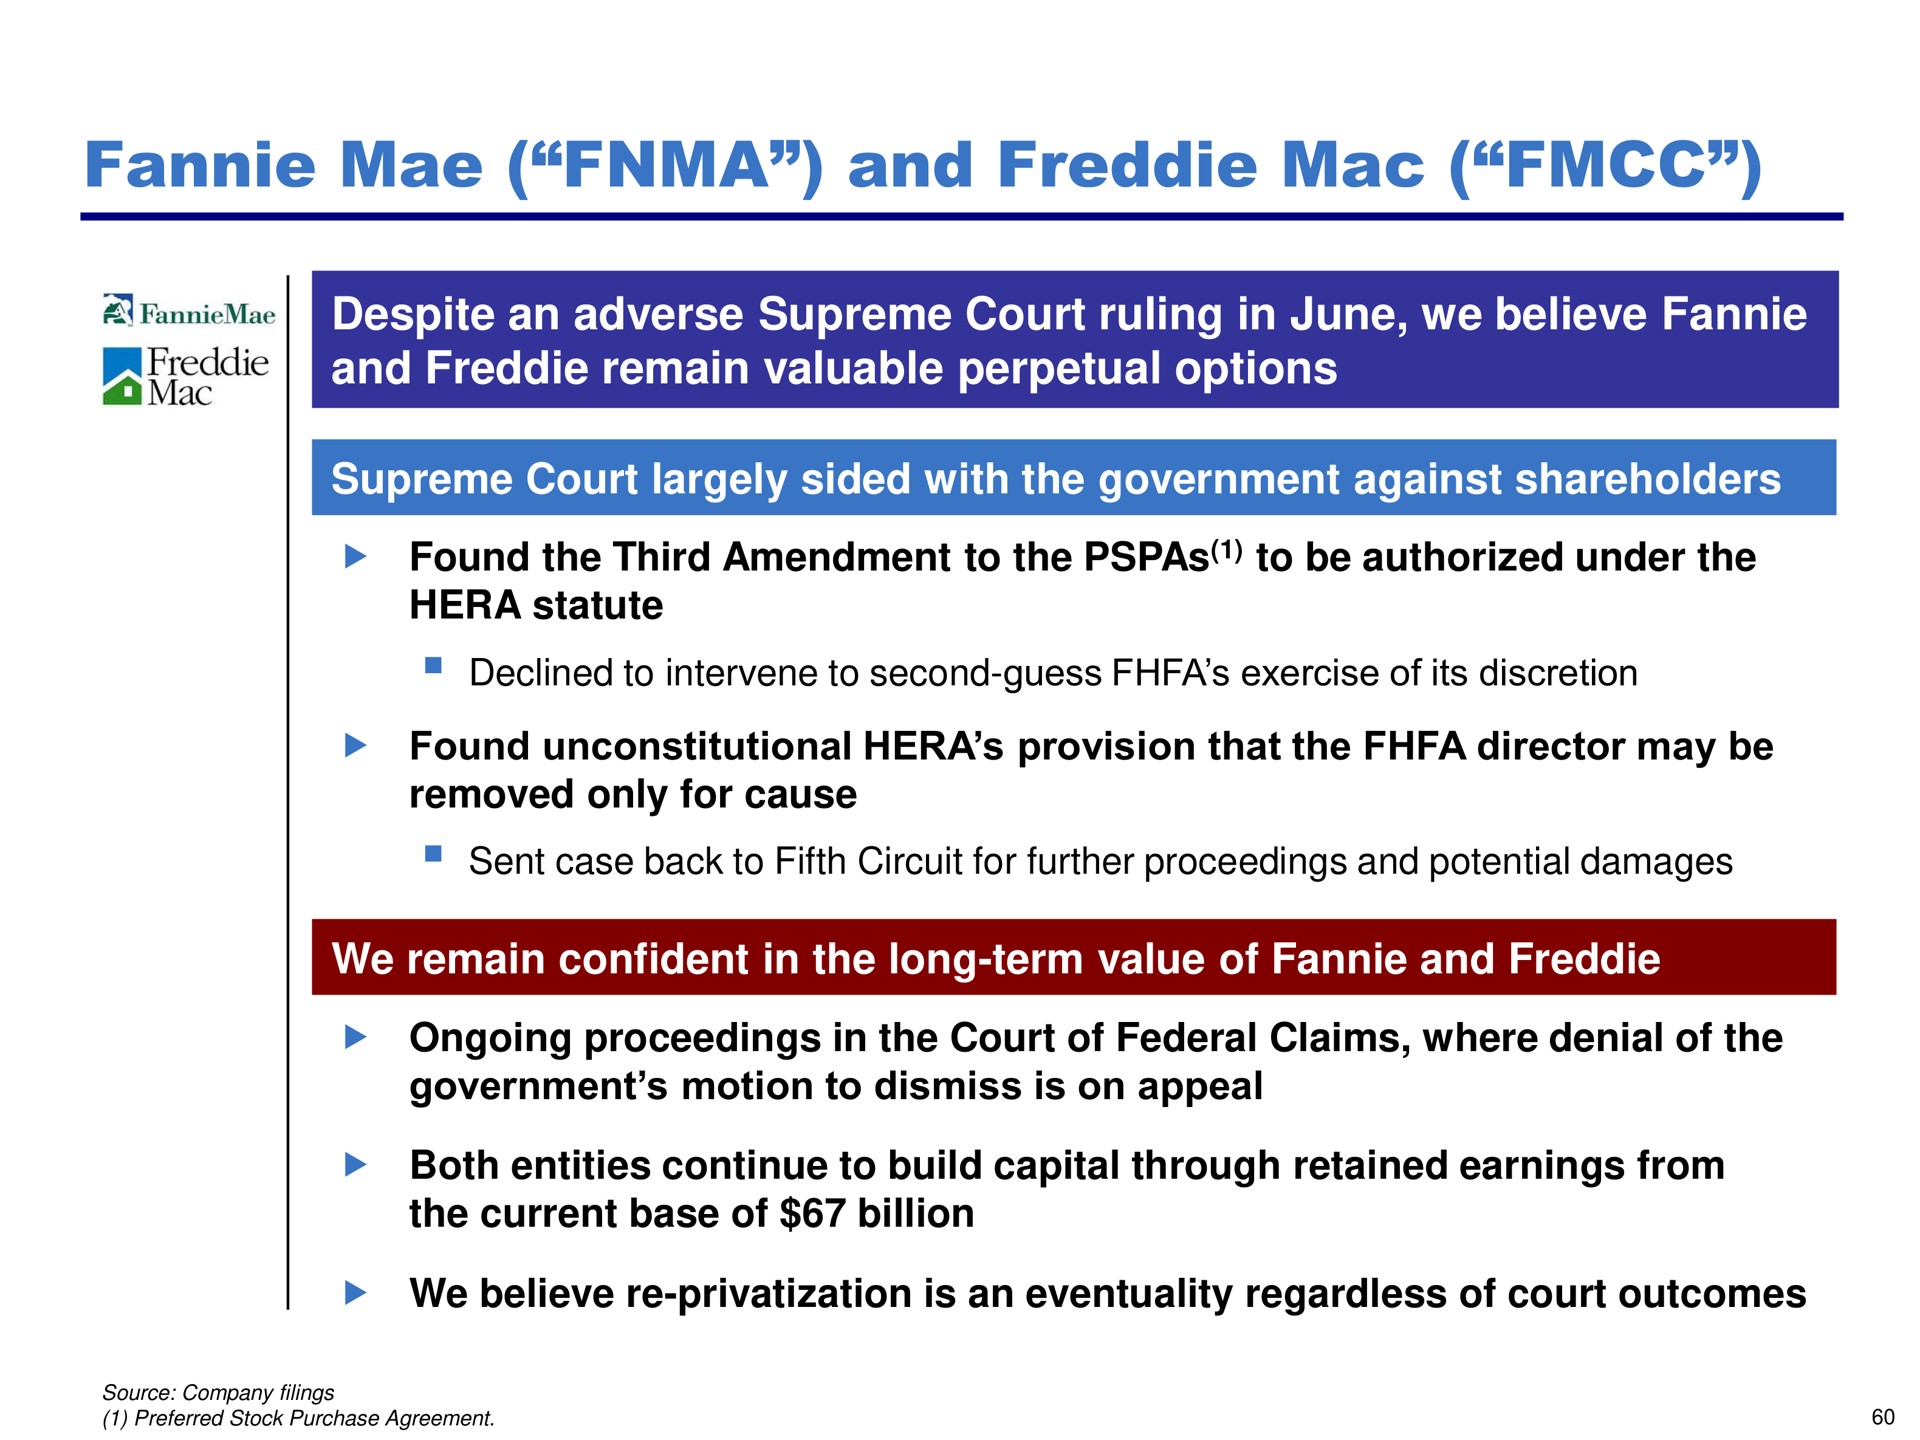 mae and mac scams a despite an adverse supreme court ruling in june we believe remain valuable perpetual options | Pershing Square